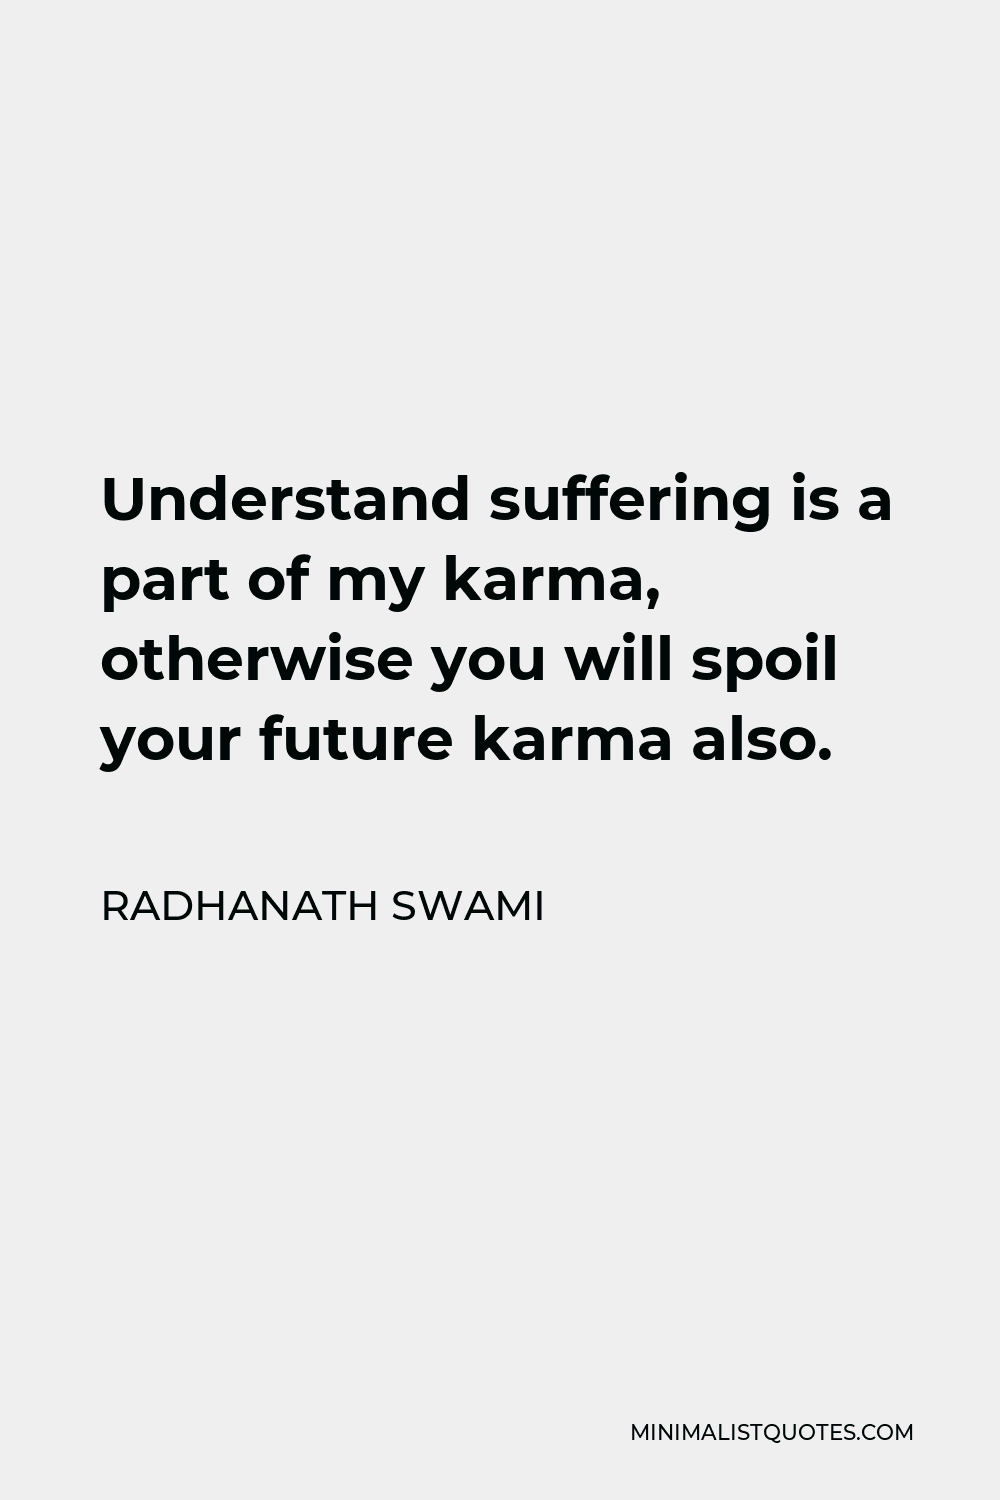 Radhanath Swami Quote - Understand suffering is a part of my karma, otherwise you will spoil your future karma also.